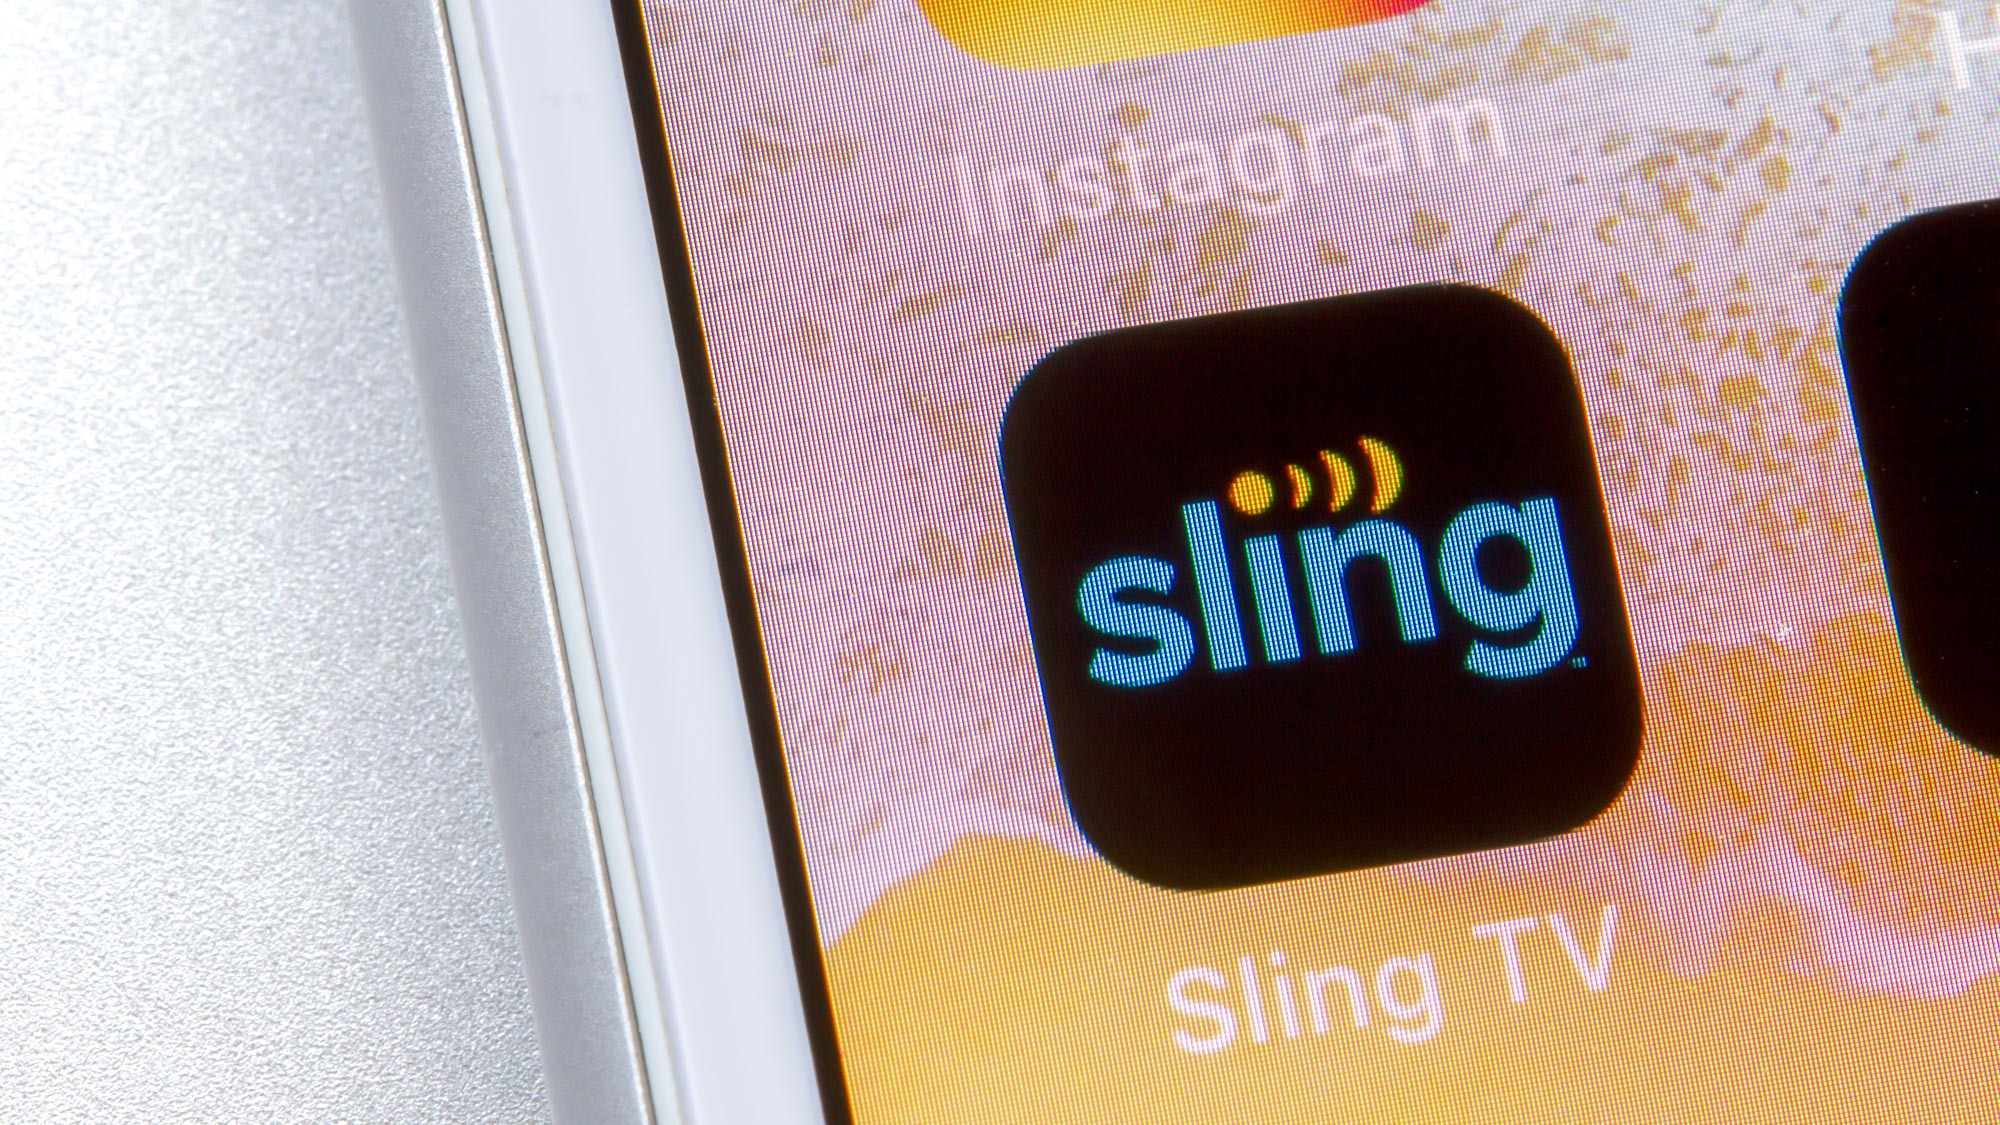 Sling app icon on iPhone